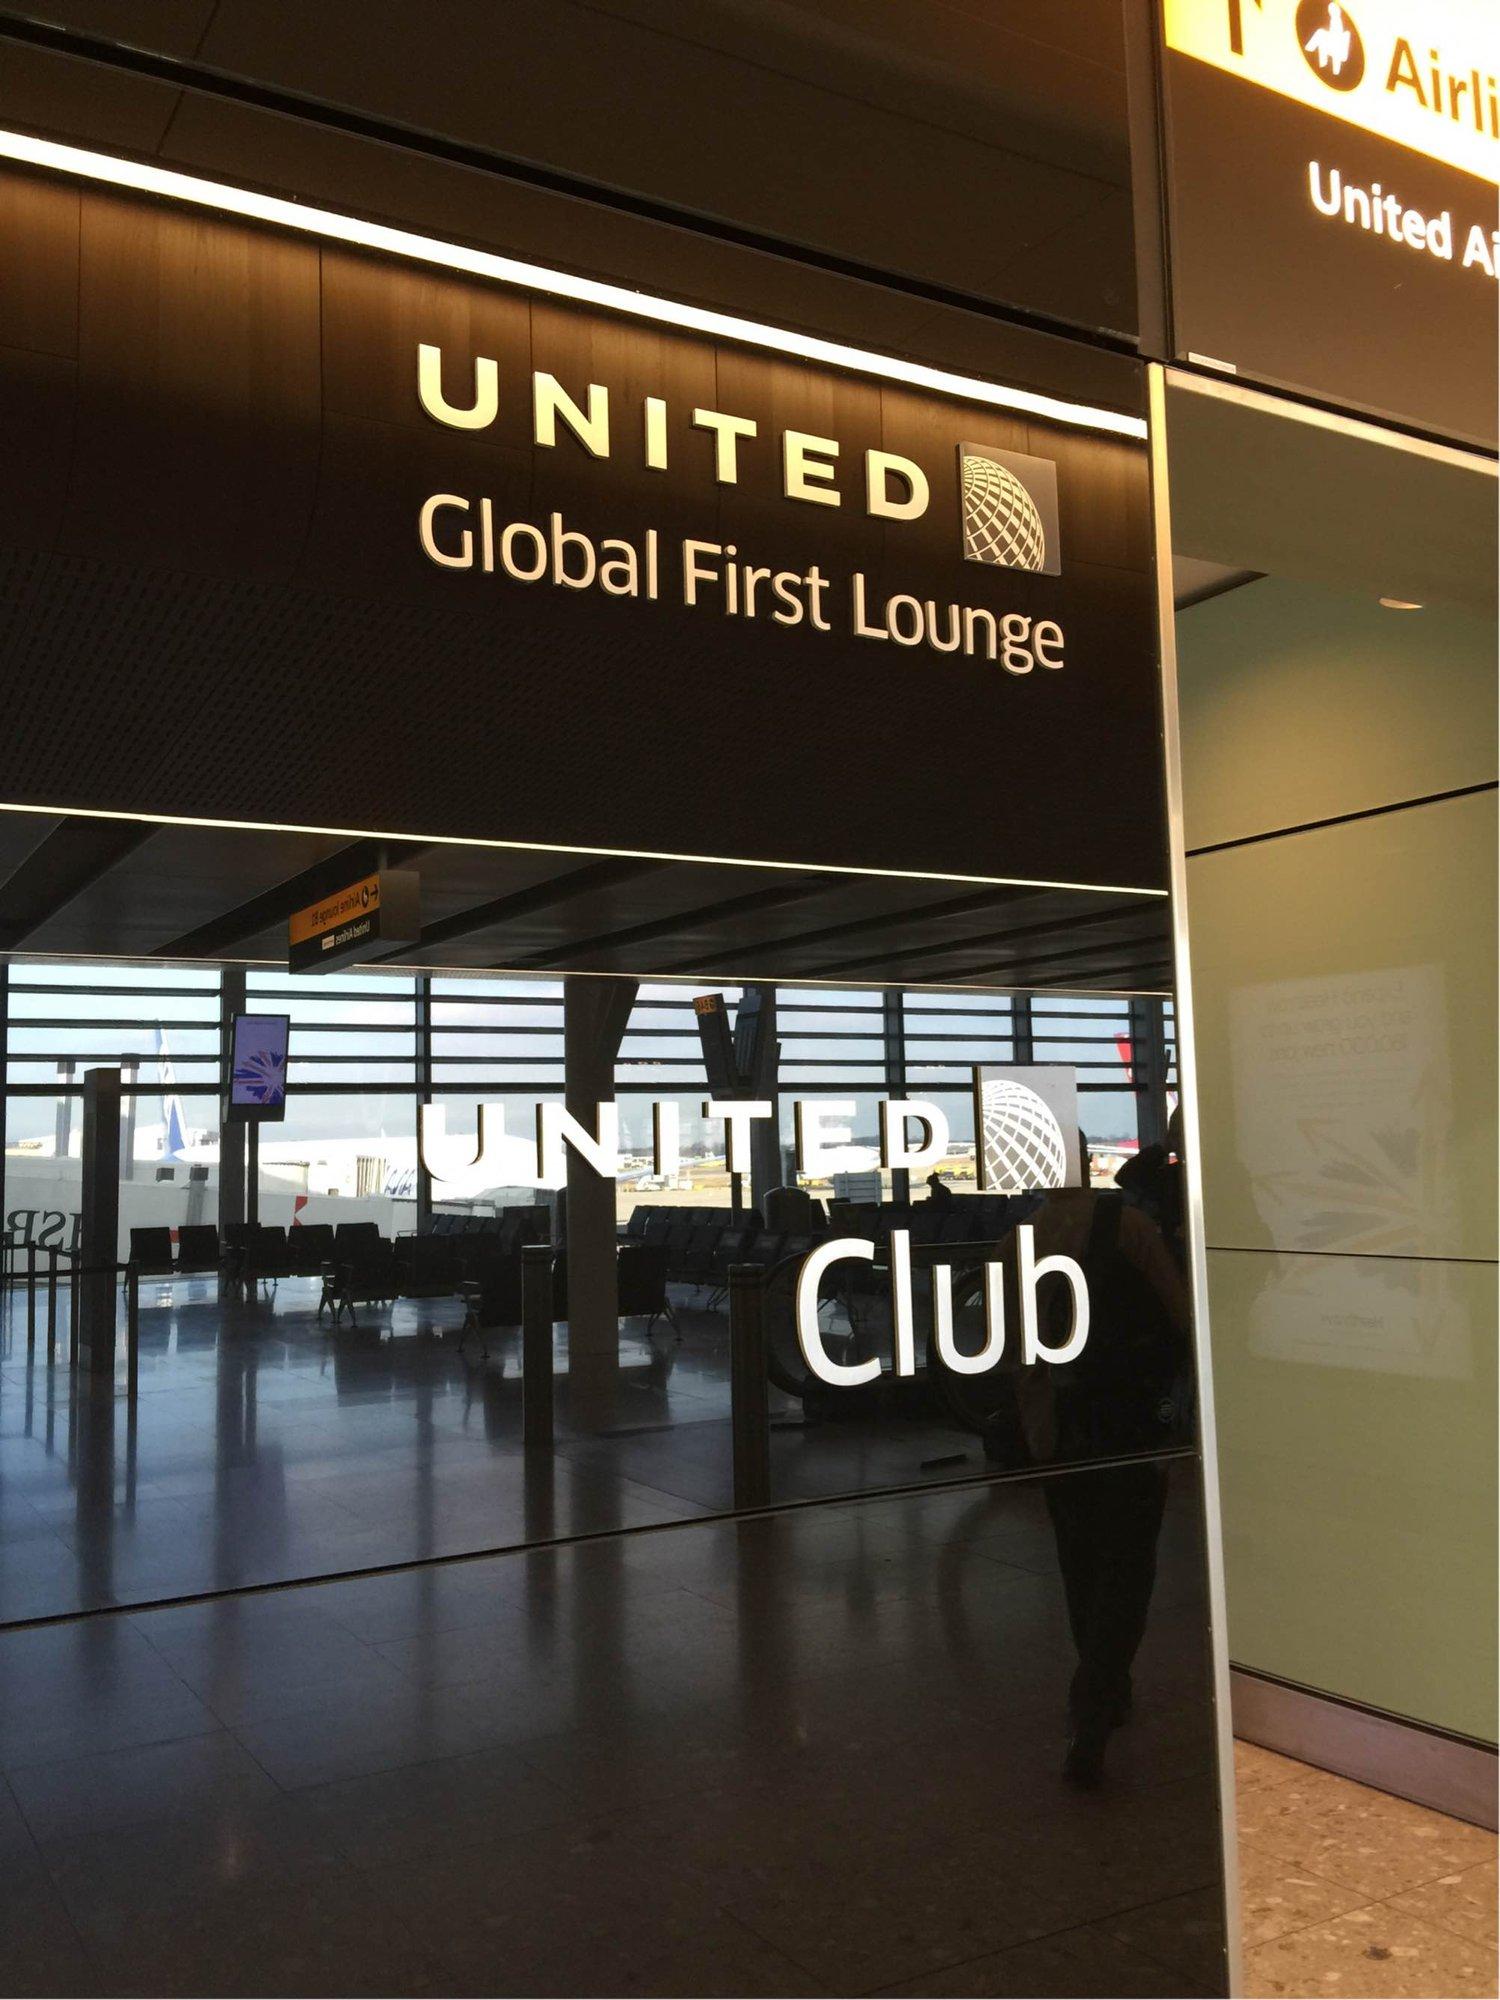 United Global Services Lounge image 24 of 25